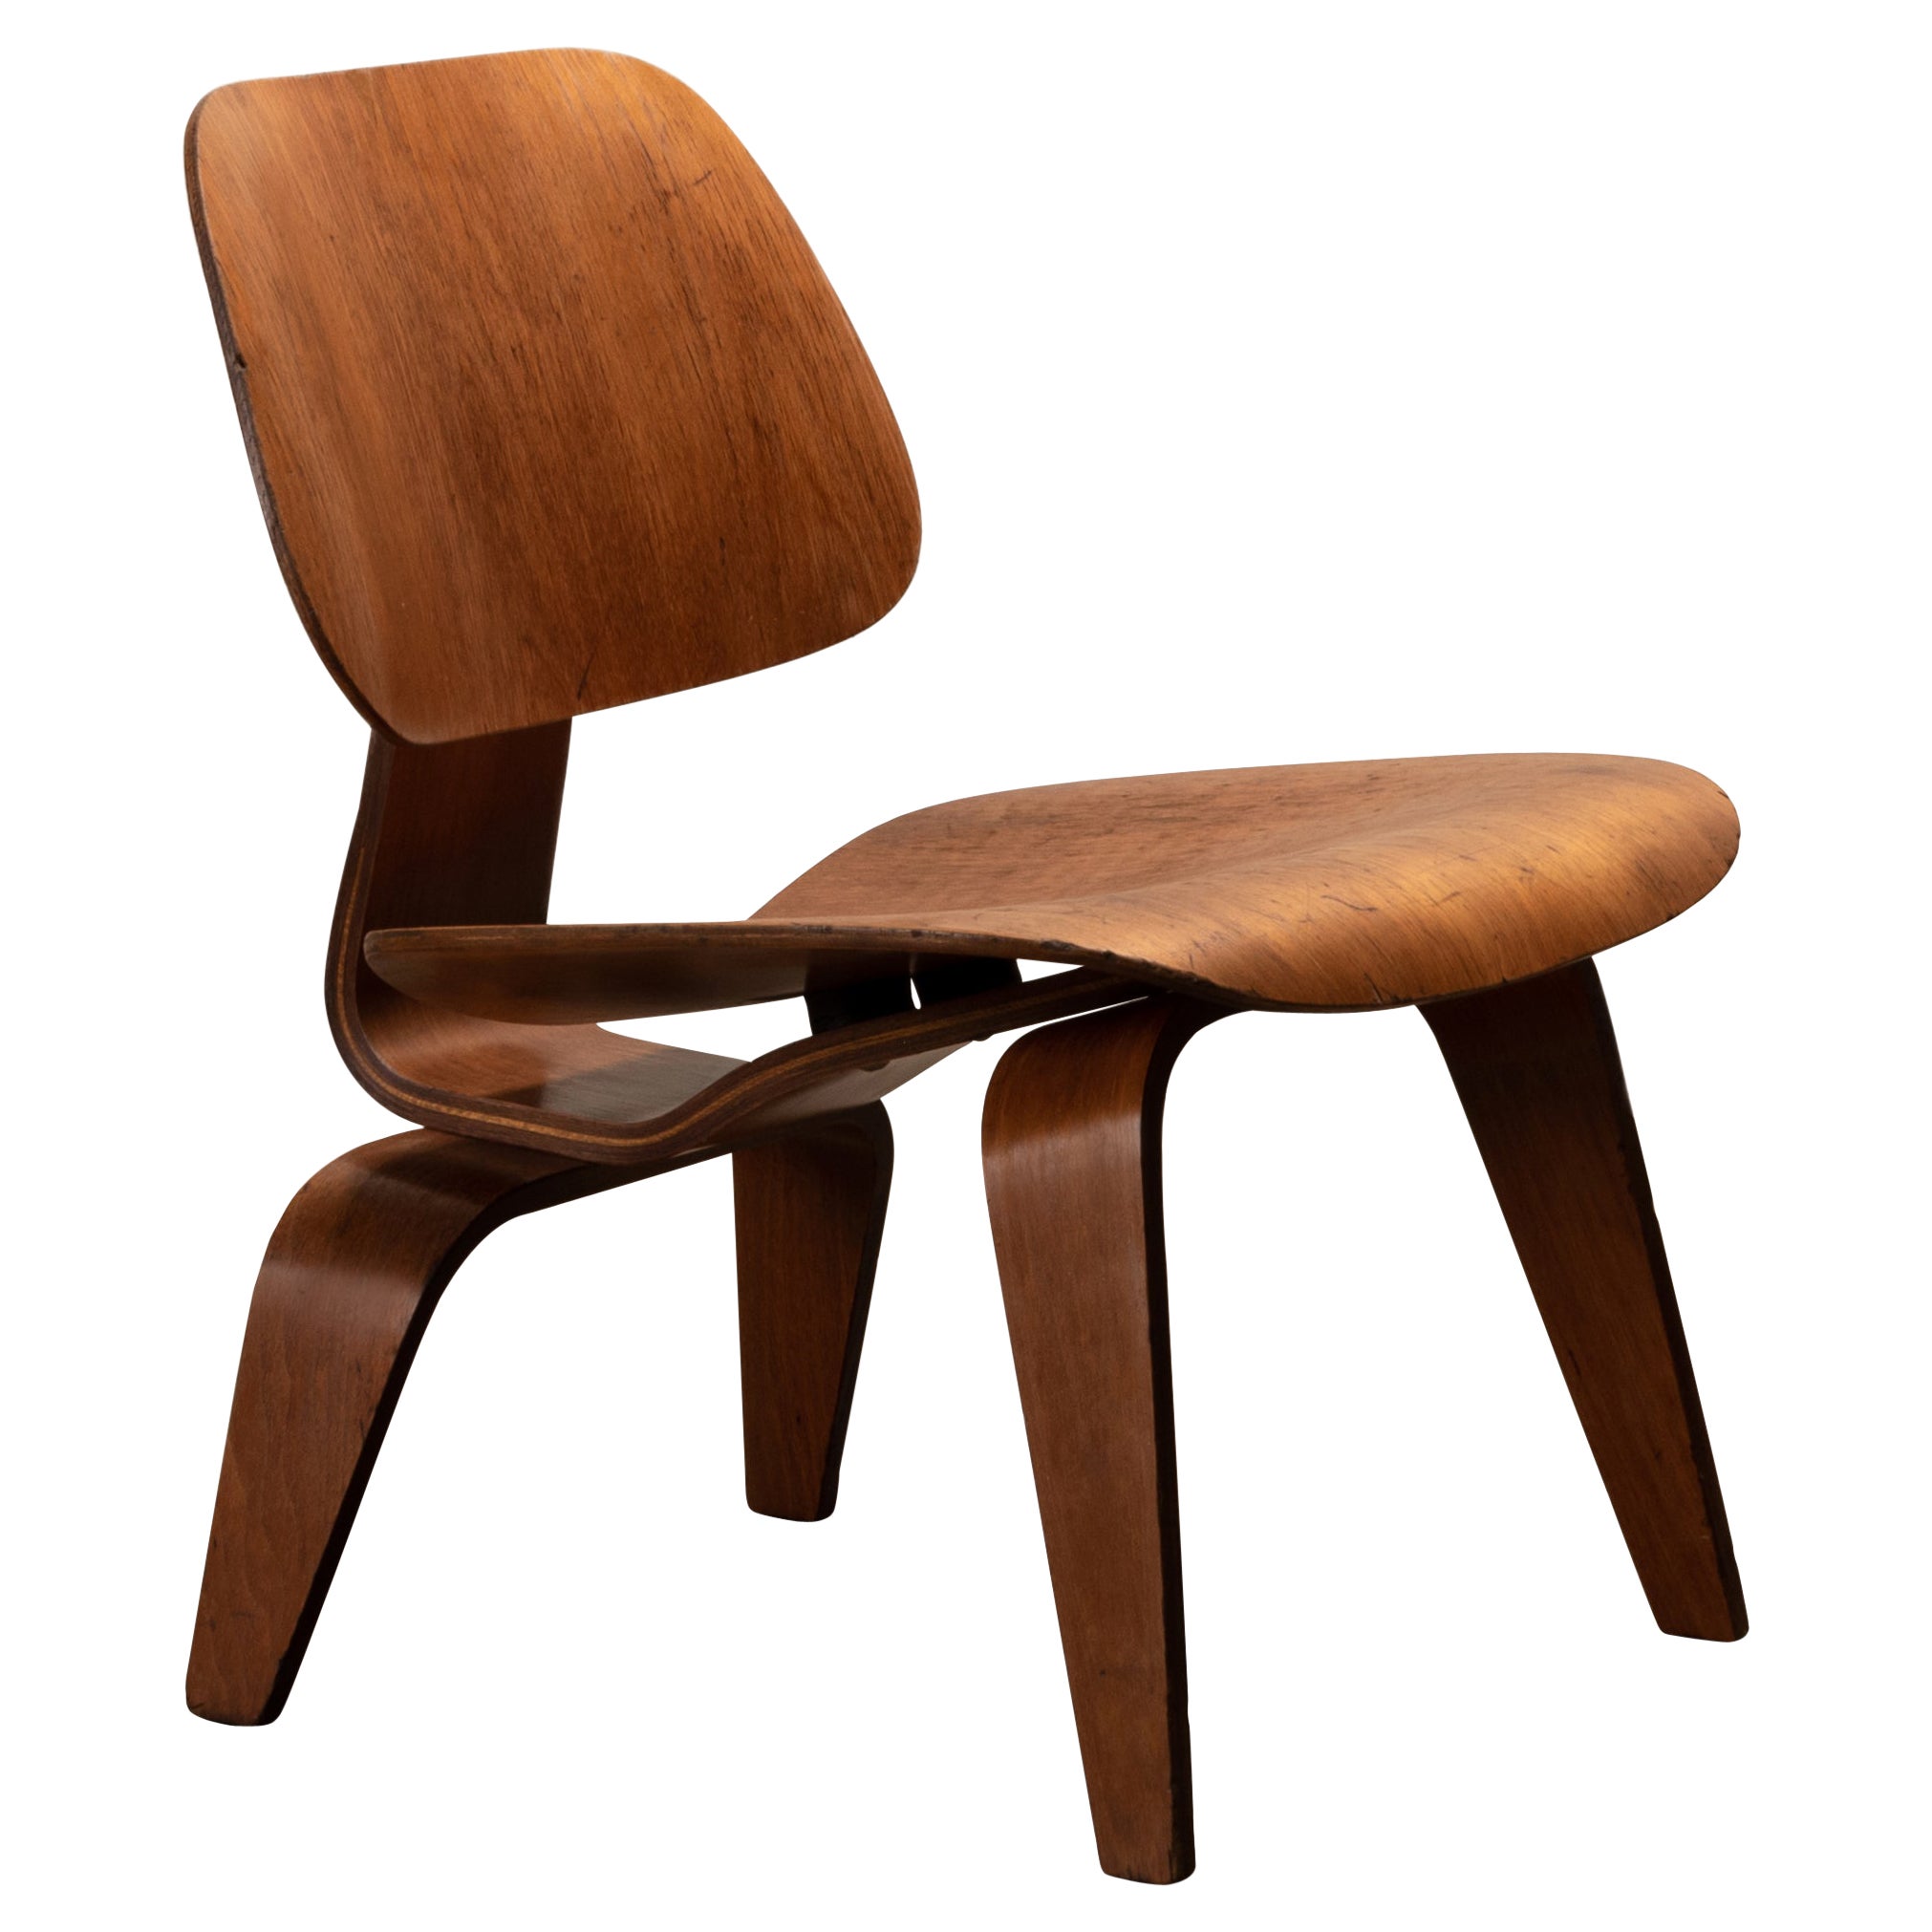 Charles & Ray Eames Early LCW Oak Lounge Chair for Herman Miller